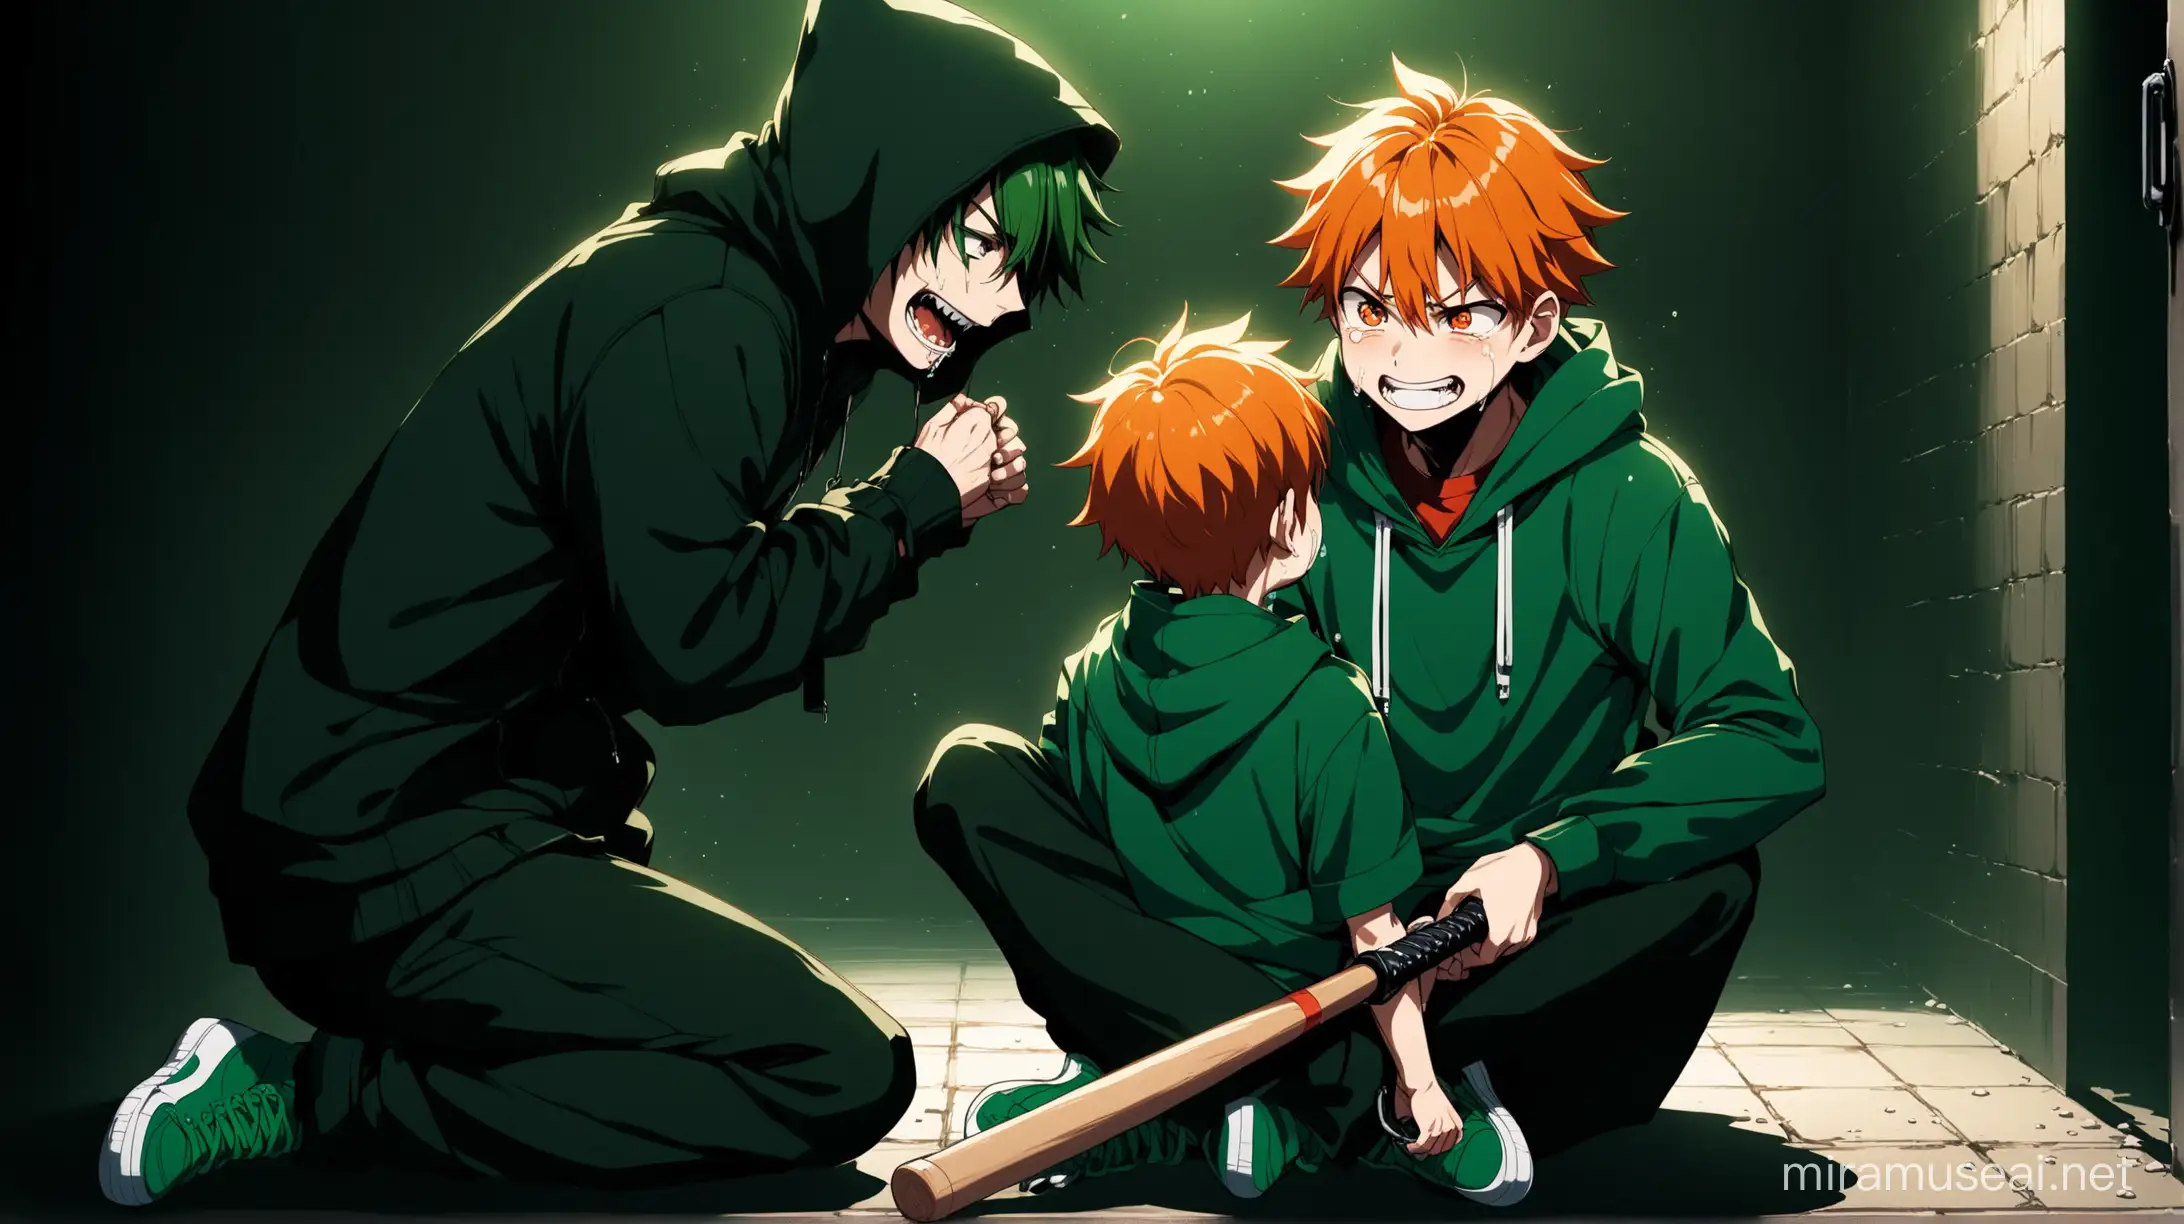 A side view  image of two anime characters in which a boy is been trapped and handcuffed by a criminal. The boy is screaming and crying and is orange headed, orange eyes, dark green hoodie, tall, handsome and is sitting on the floor of a underground secret room. The criminal is dark green headed, evil, evil smile, red bright eyes, badass, tall, wearing dark green hoodie with red inner shirt collars, green sneakers. The criminal is  touching the boys chin with a baseball bat and bending to talk with the boy. The boy is sitting on the floor handcuffed, crying, staring at the eyes of the criminal. The boy and the criminal are sitting in an underground secret room with dark green contrasts and vibe. The criminal is evil smiling and harrassing the boy with a baseball bat. The kid is crying.